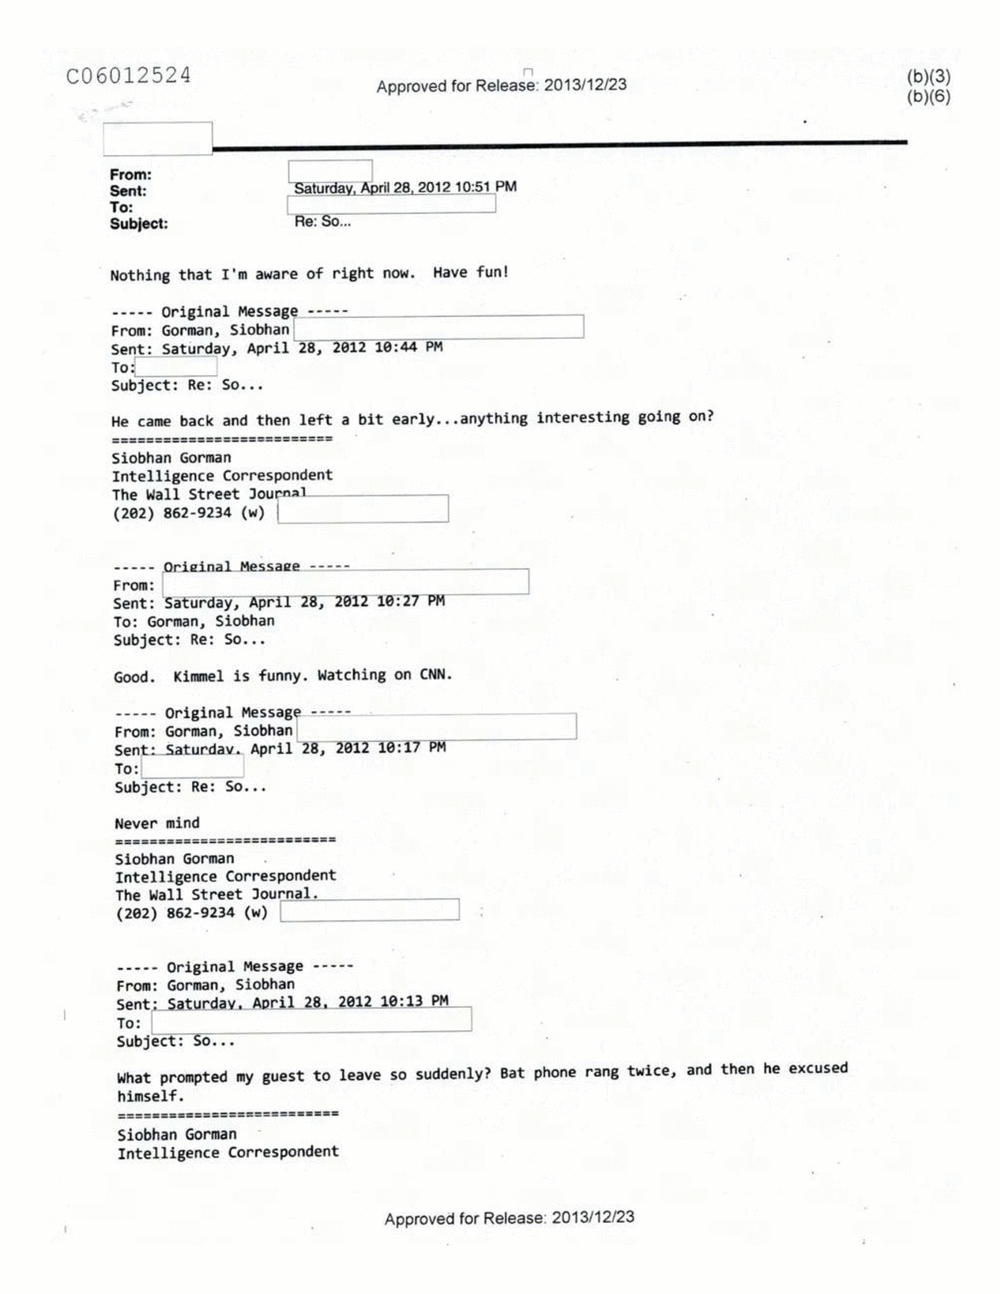 Page 46 from Email Correspondence Between Reporters and CIA Flacks